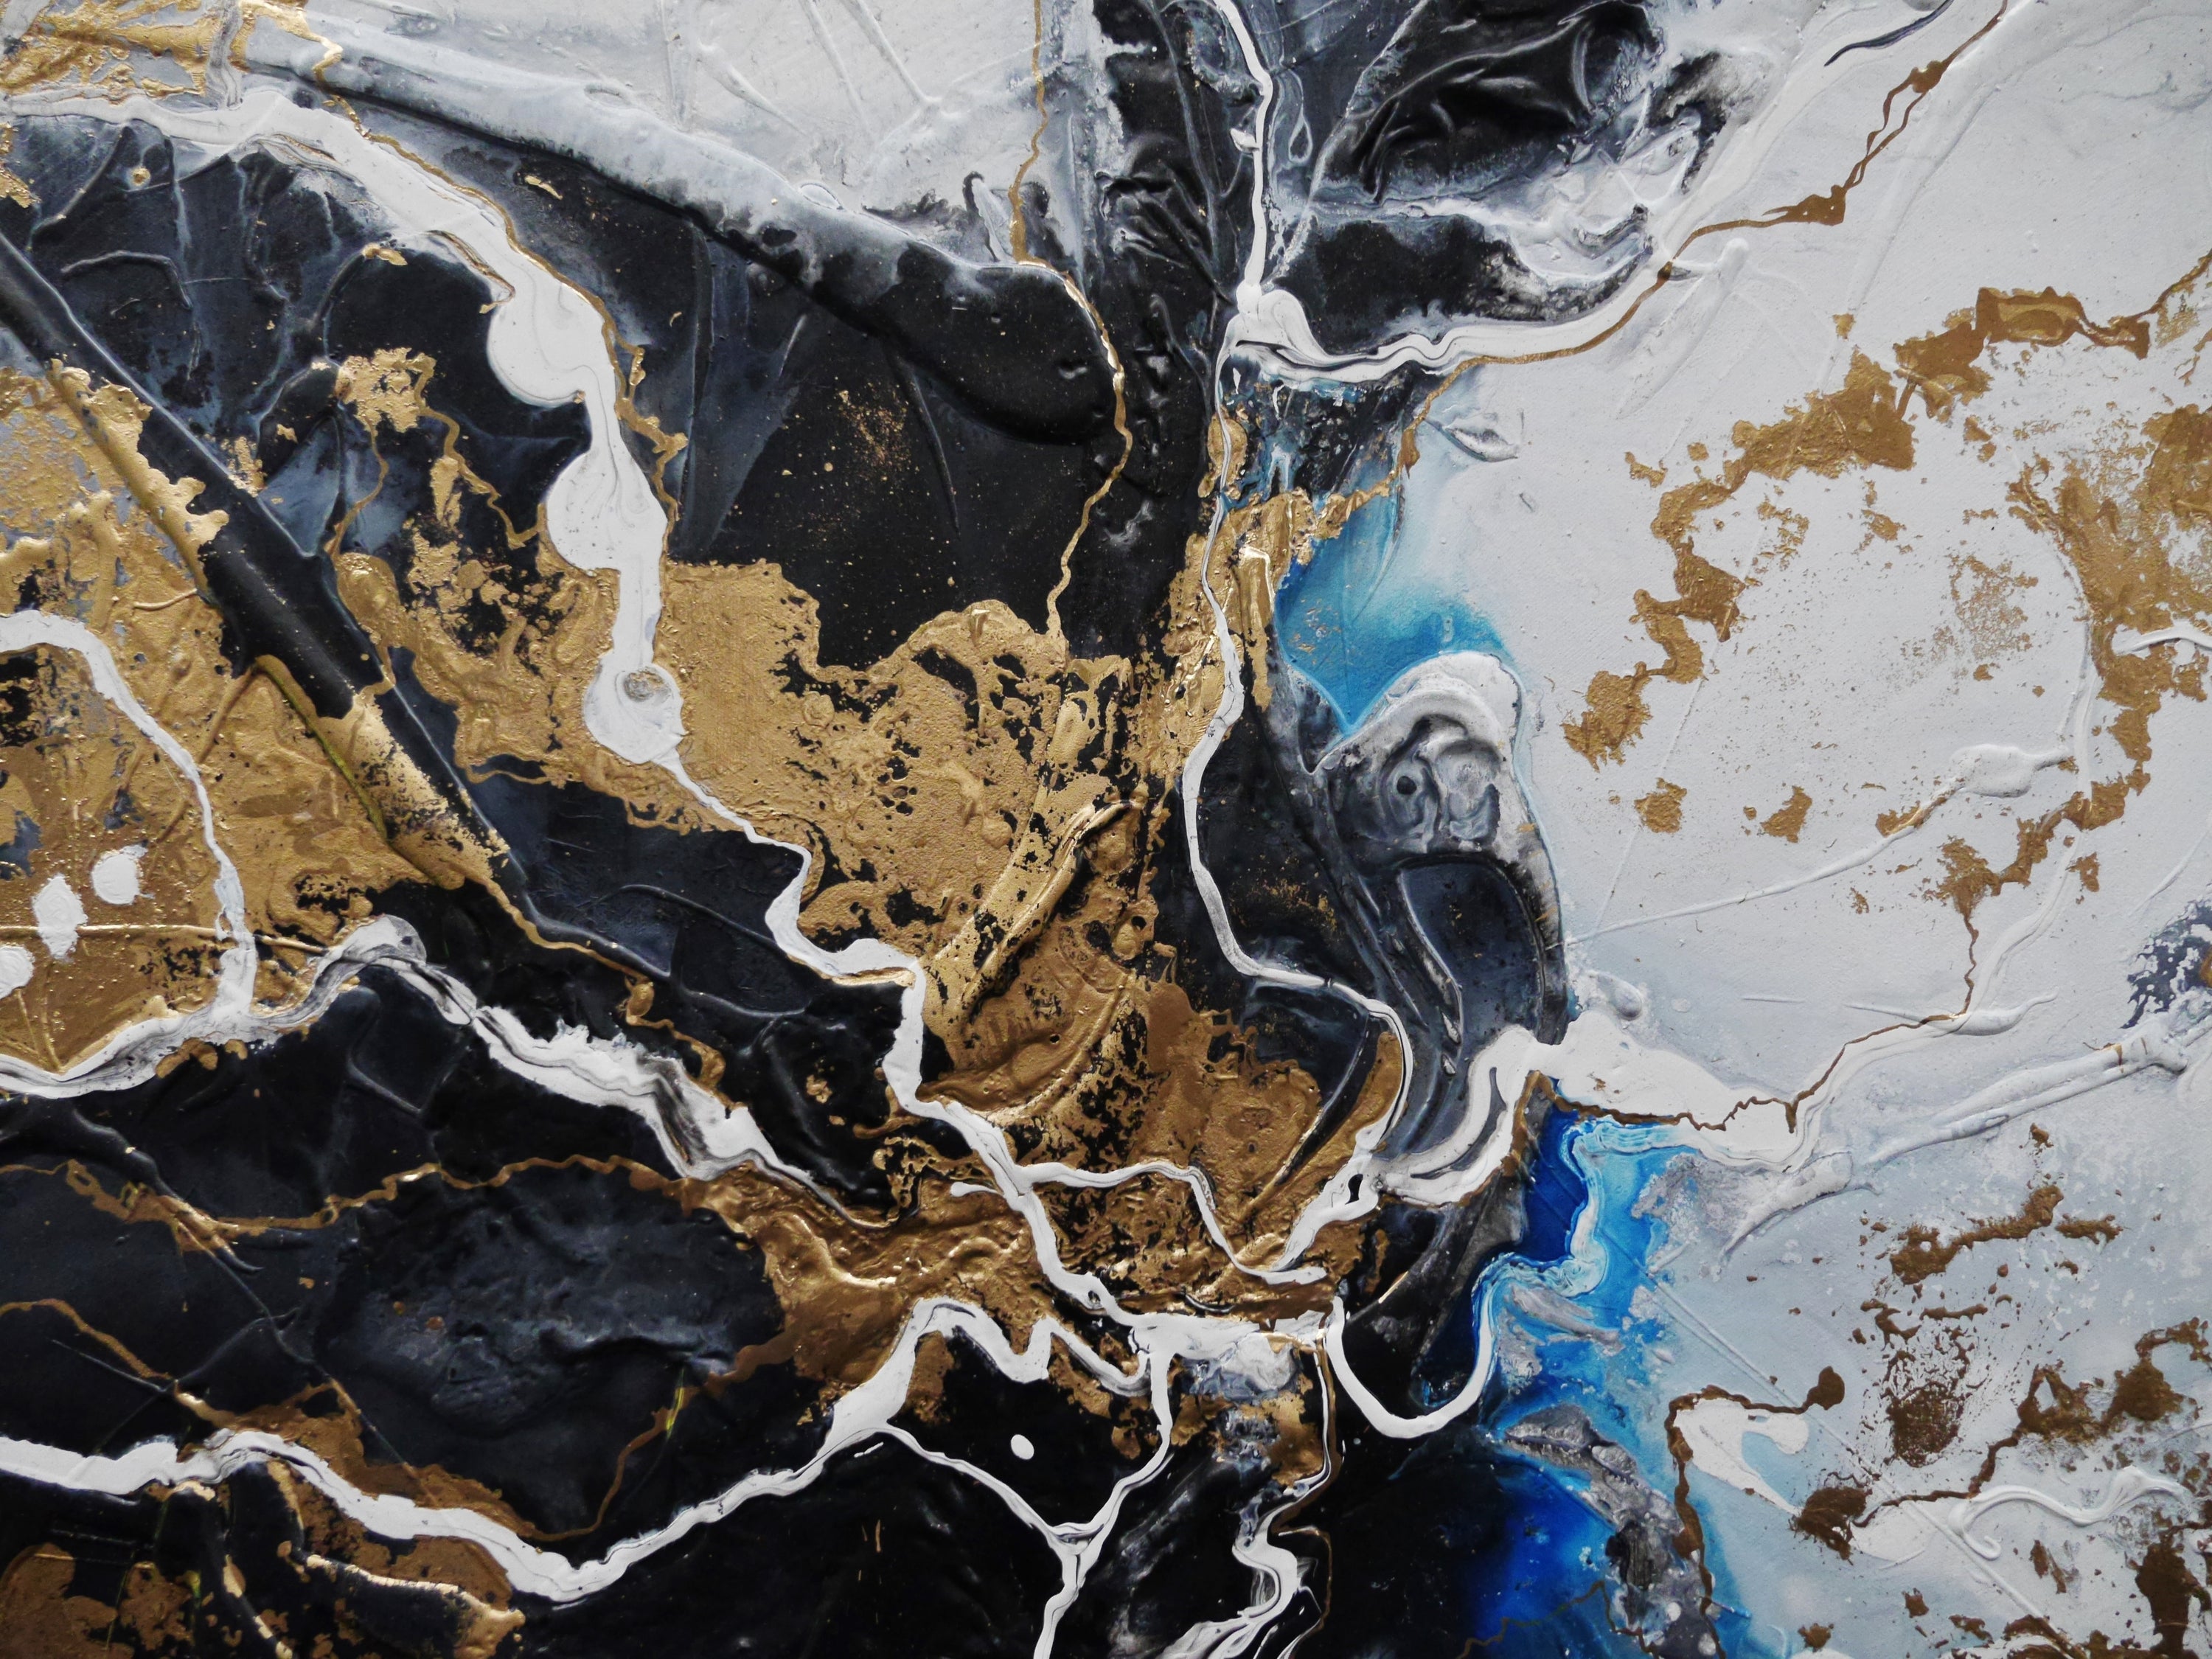 The Bling 240cm x 100cm Black Metallic Gold Blue Textured Abstract Painting (SOLD)